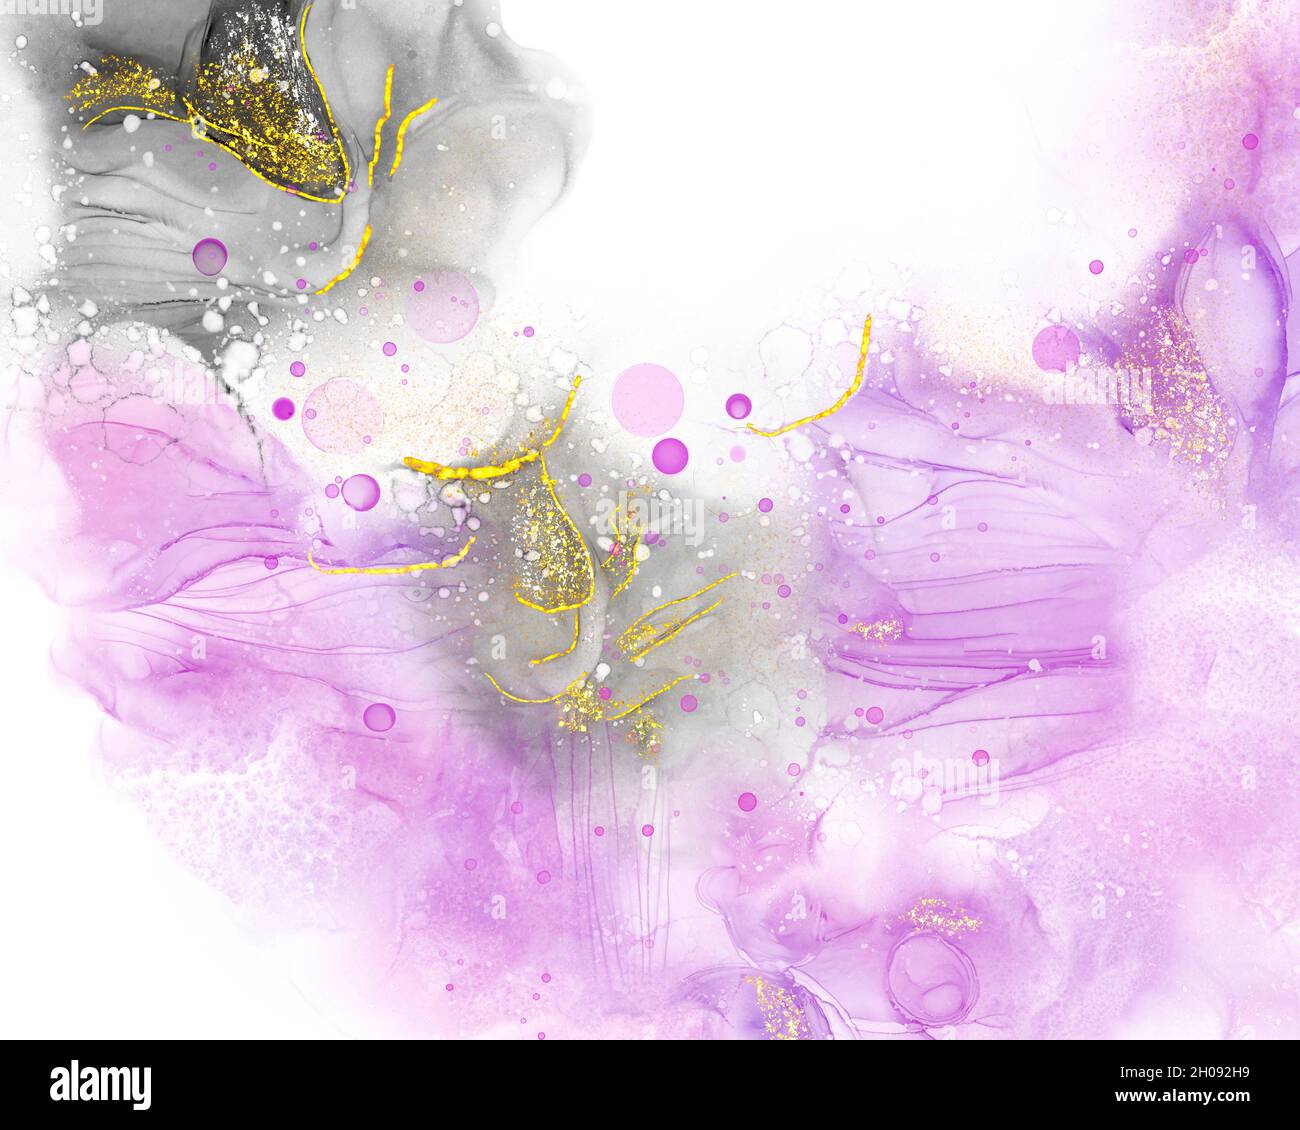 Abstract purple and black flower art painting background alcohol ink technique Stock Photo